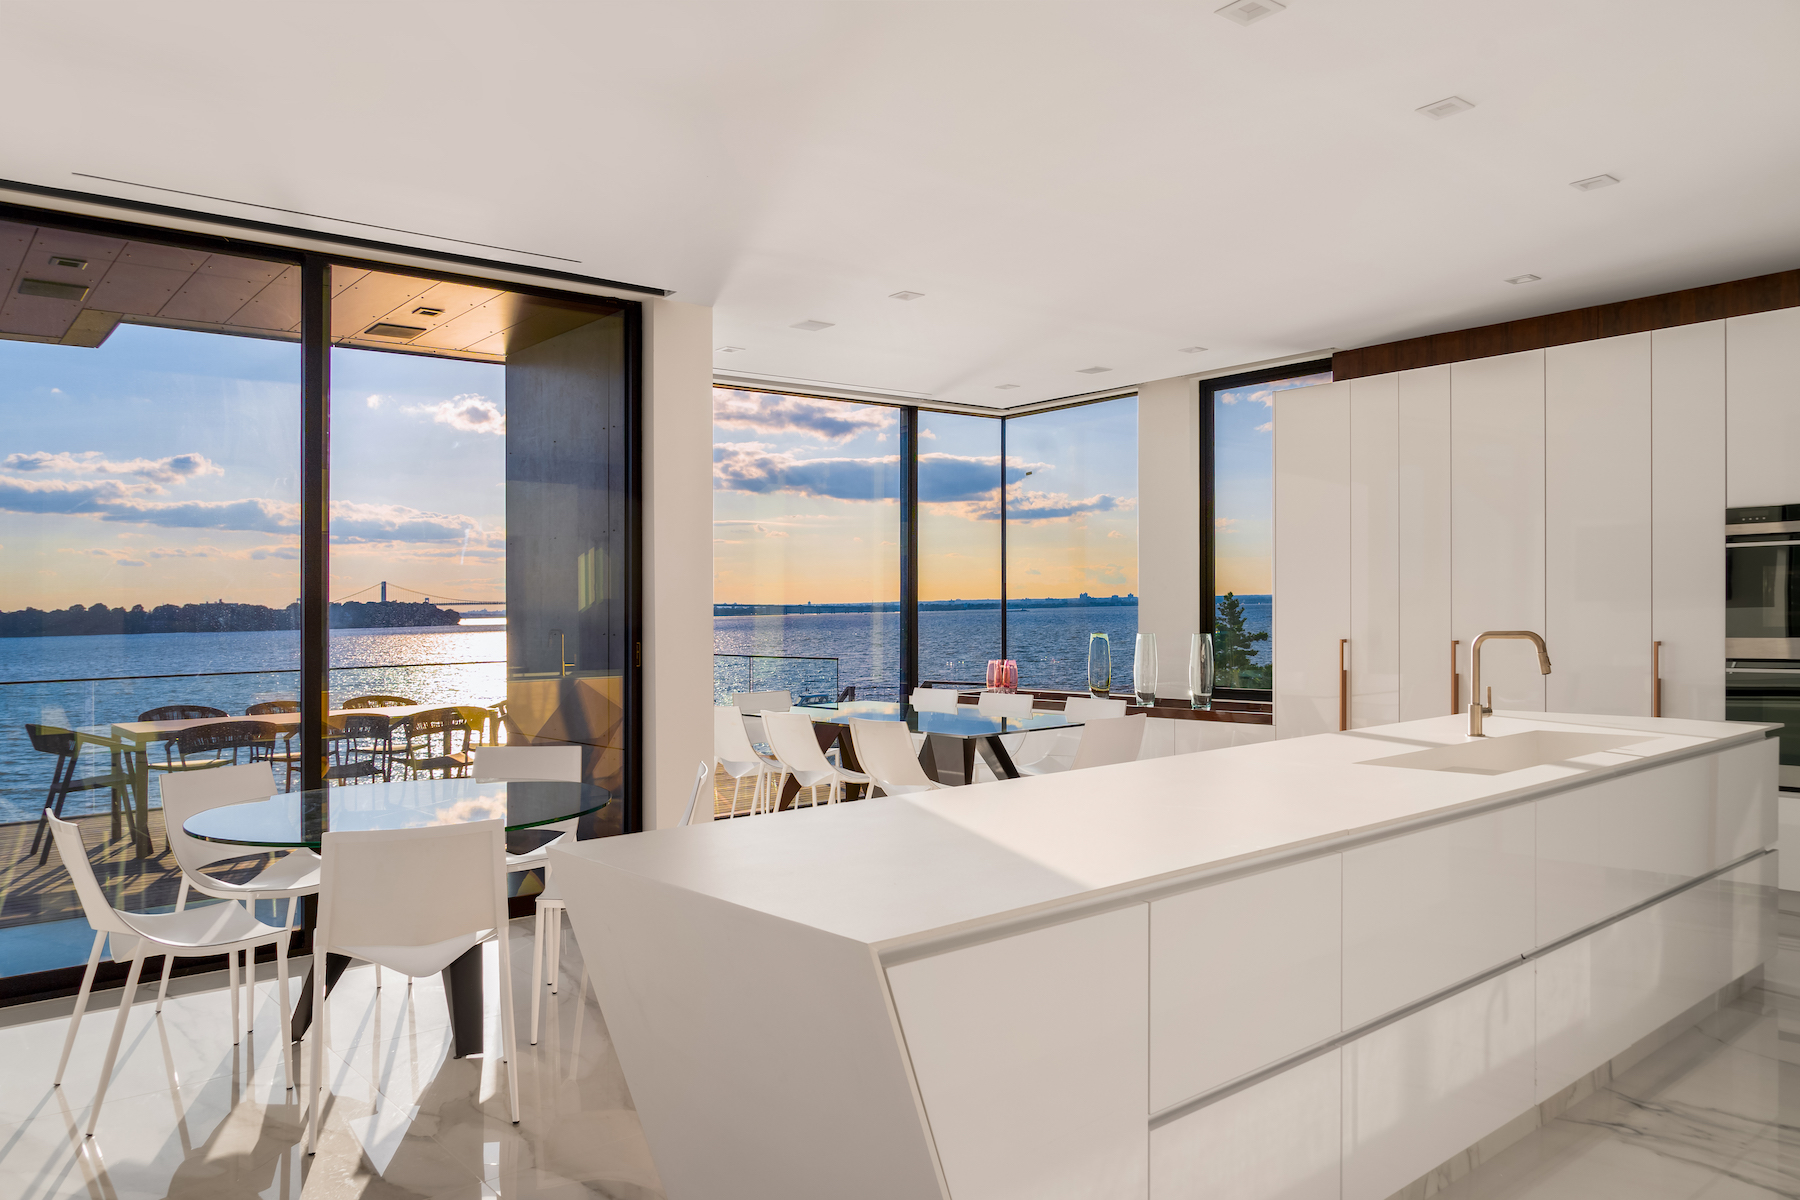 The villa's designers echoed the stunning views of Manhattan Island across the bay with geometric shapes and bold lines - Effect Magazine